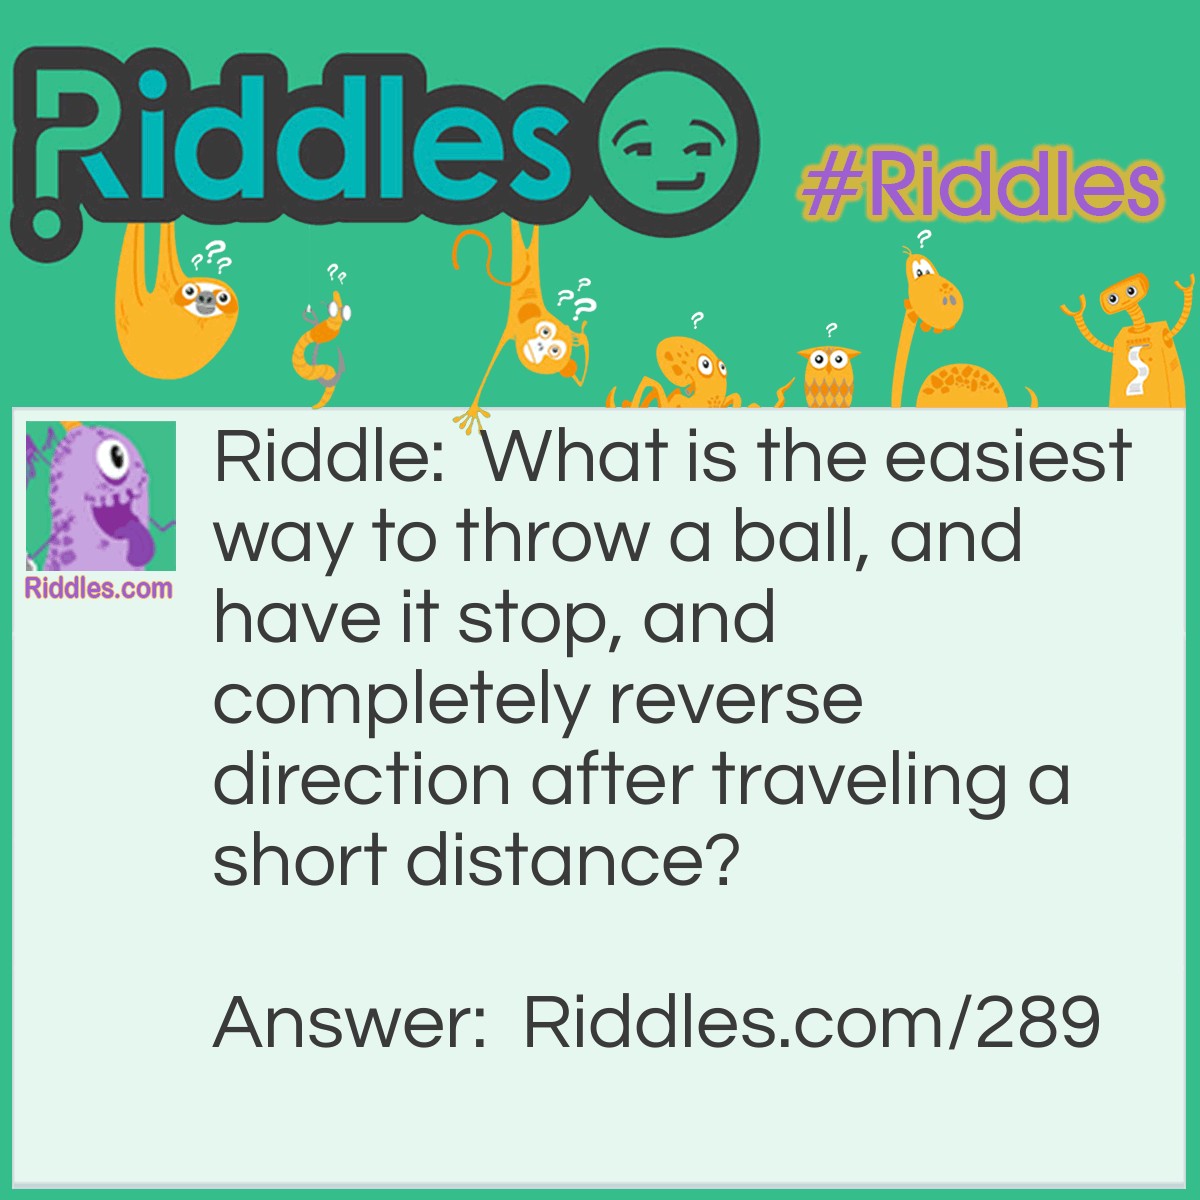 Riddle: What is the easiest way to throw a ball, have it stop, and completely reverse direction after traveling a short distance? Answer: Toss it straight up in the air.